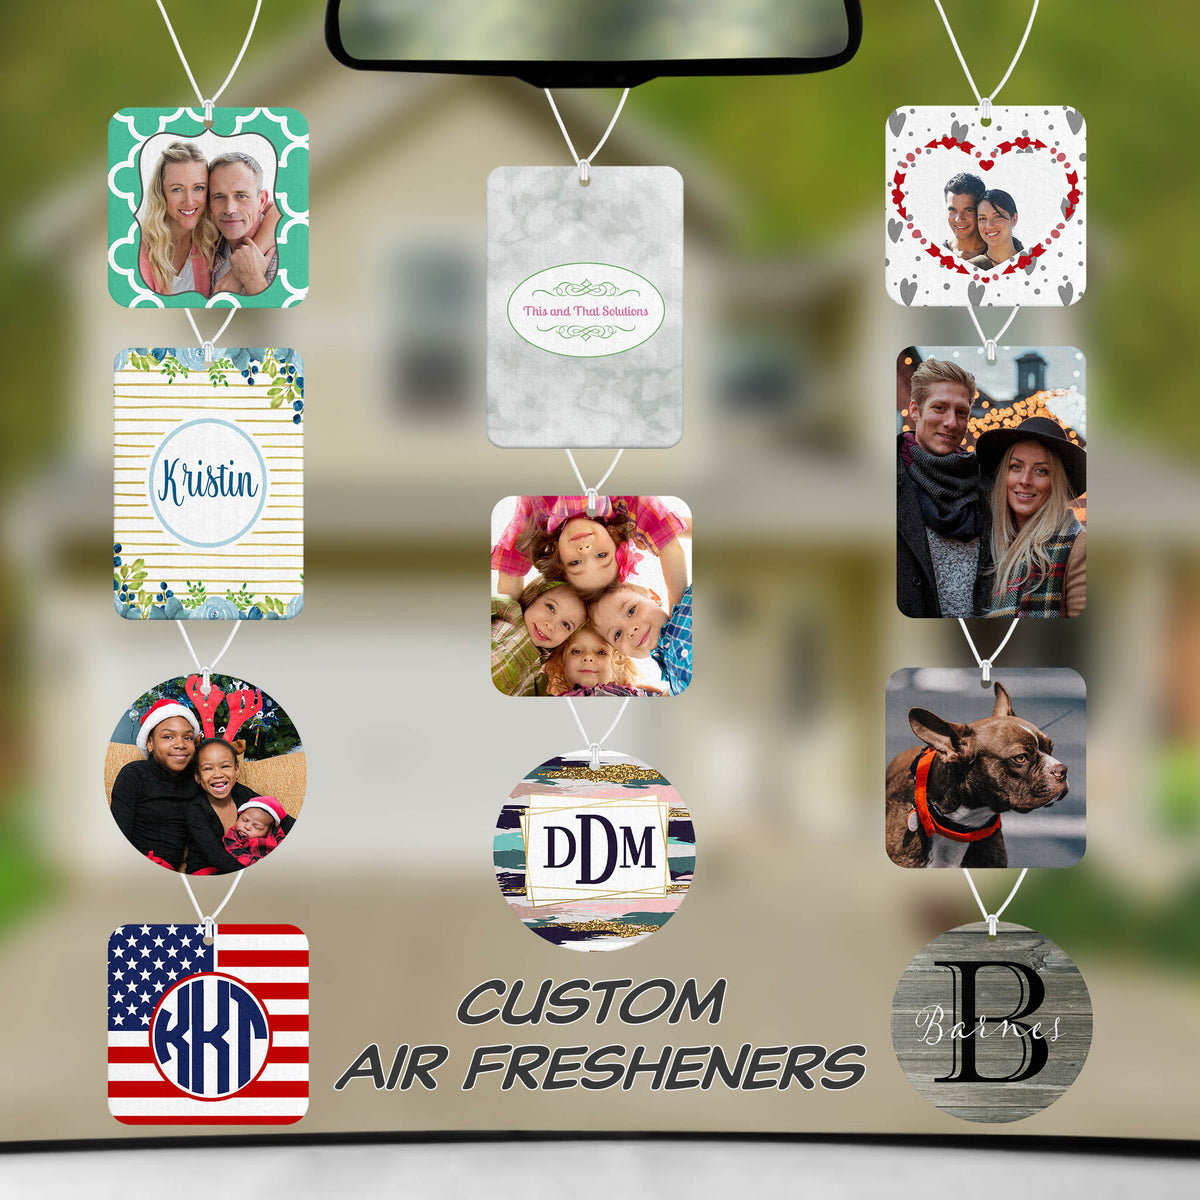 Personalized Air Fresheners | Set of 2 | Custom Car Accessories | Children Photo